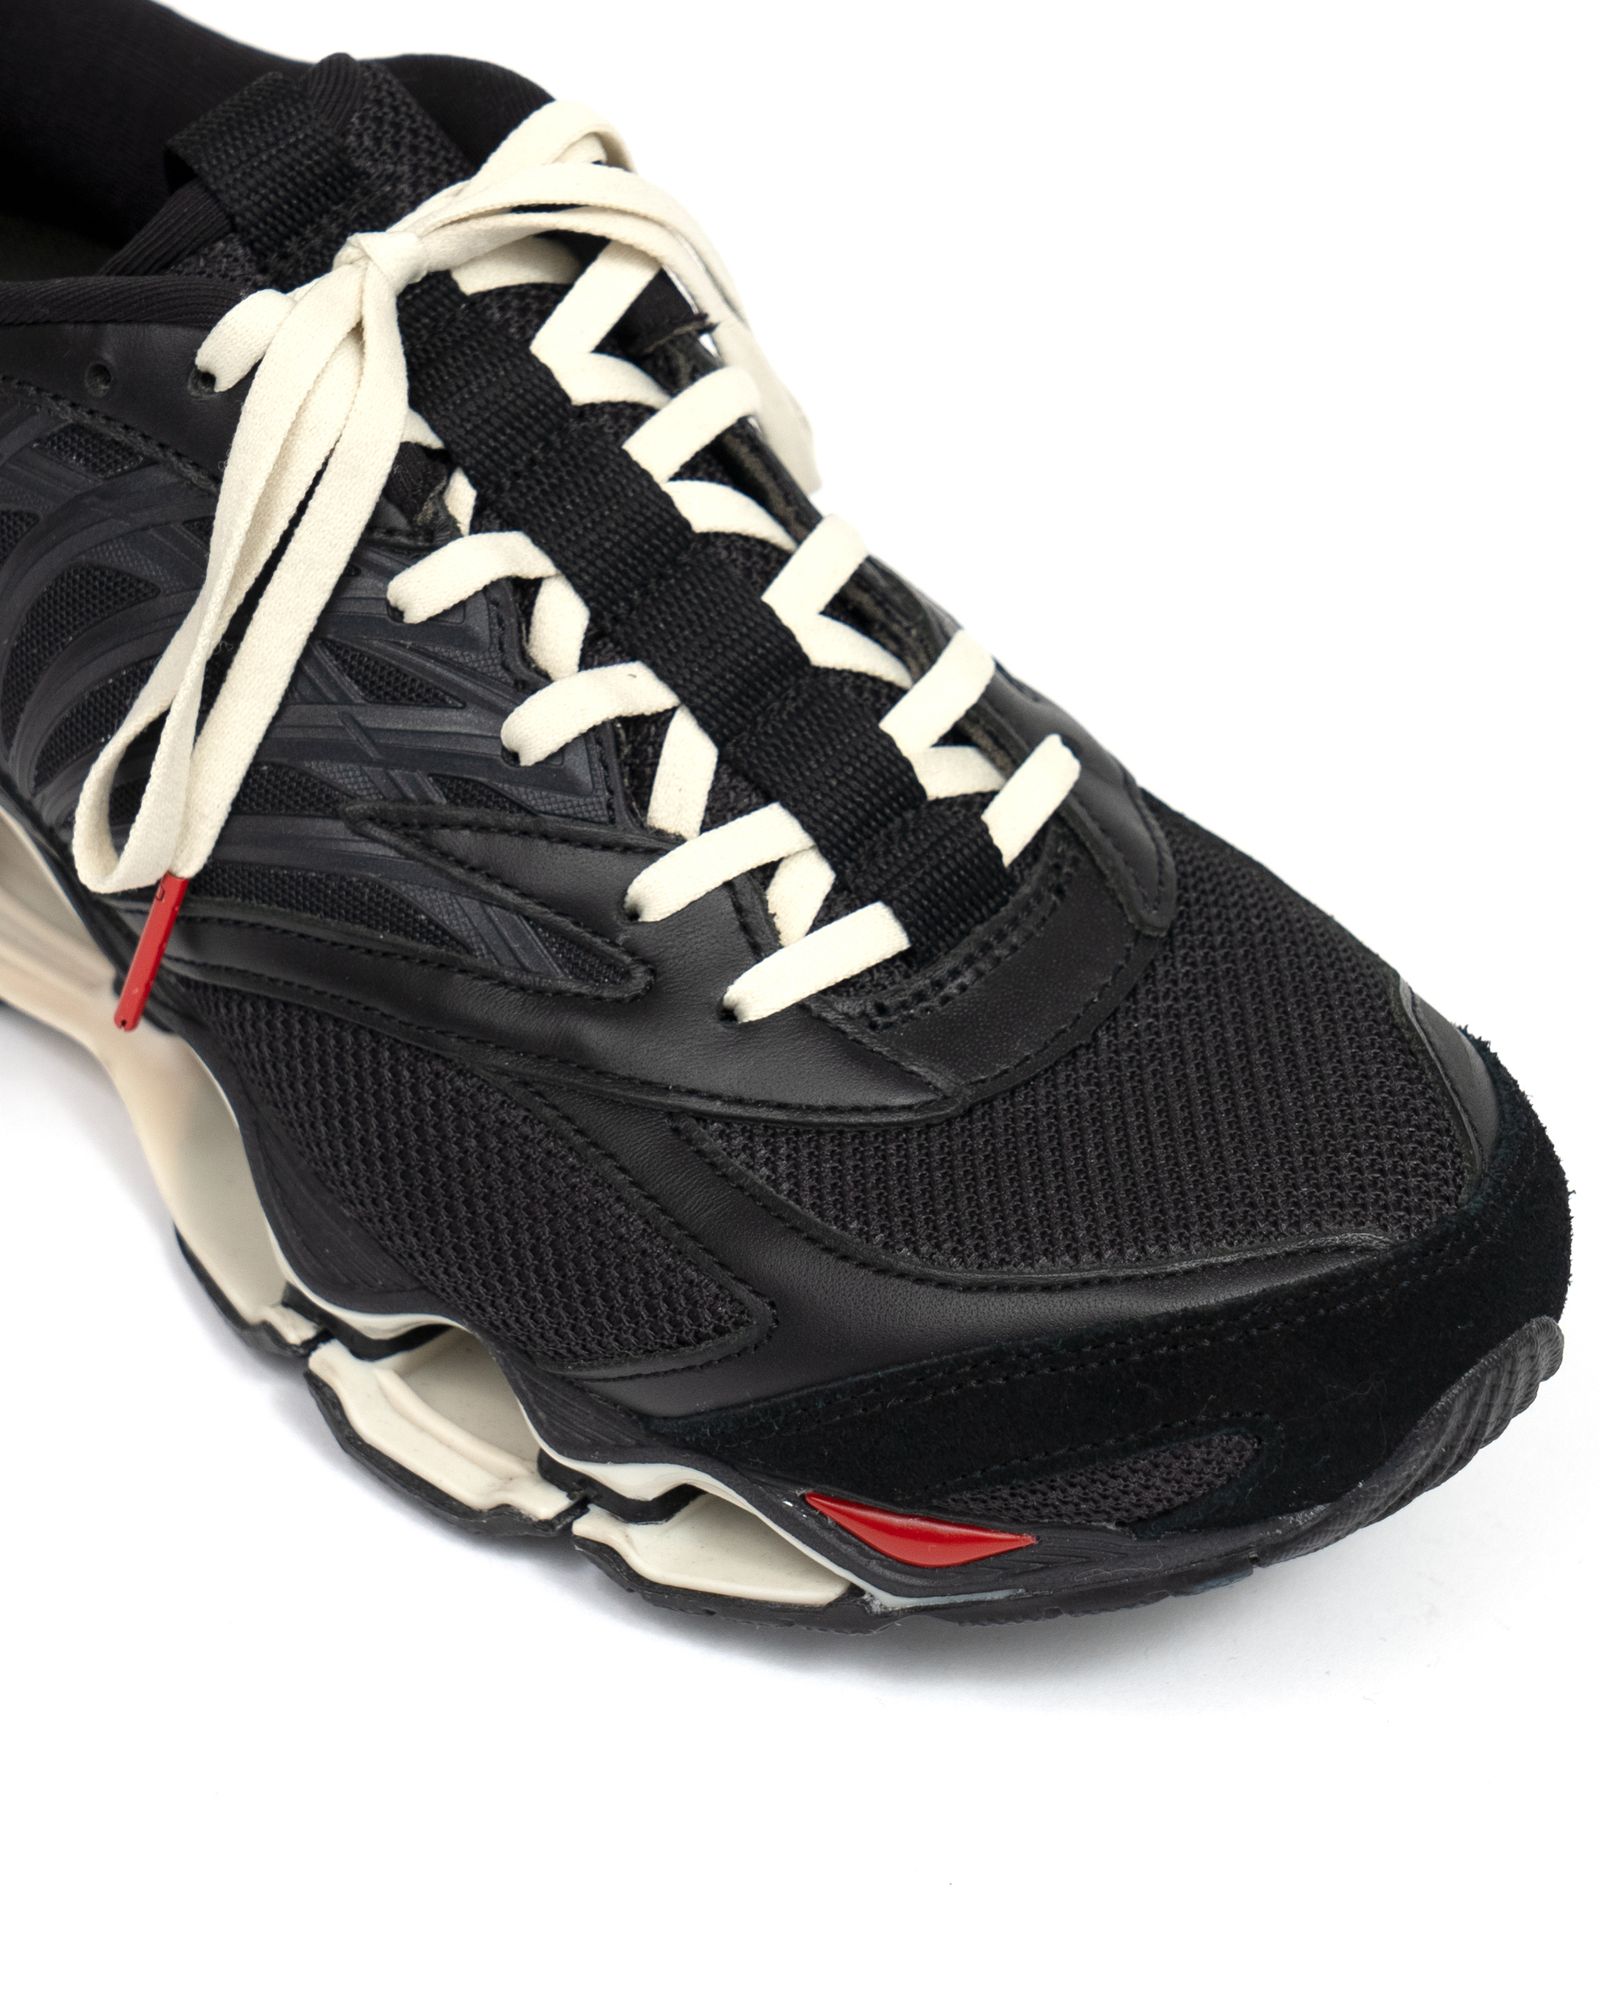 Graphpaper - MIZUNO WAVE PROPHECY LS for 